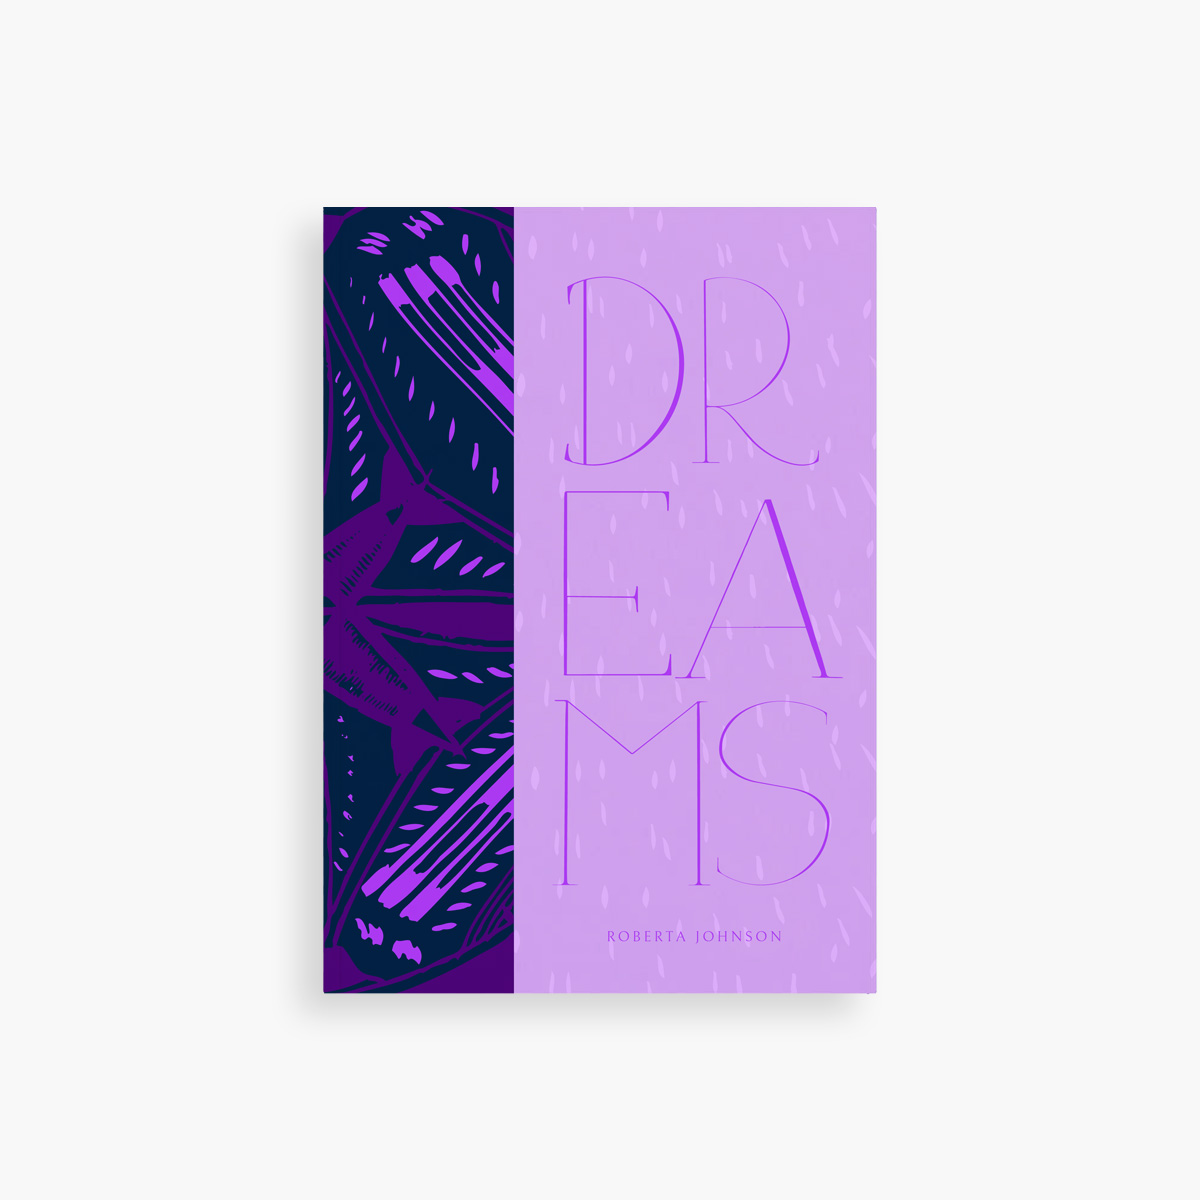 Lilac Dream Journal – personalizable